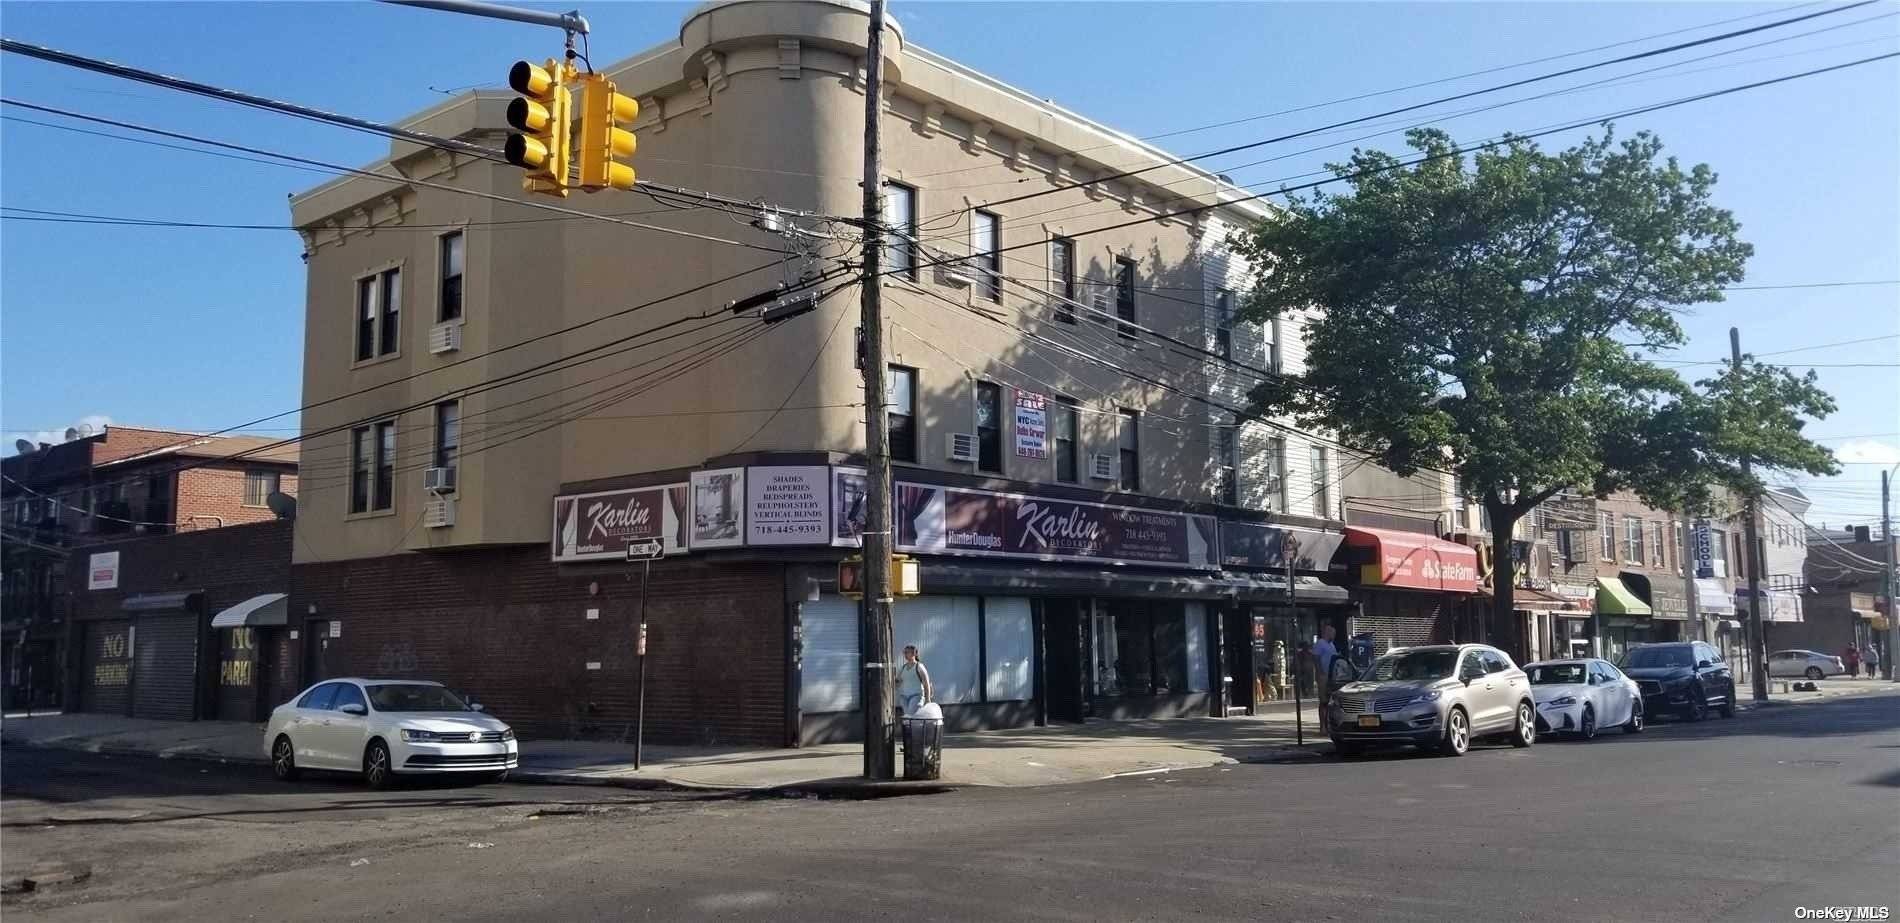 Mixed Use Property In Excellent Condition ; This Property Feaures1600 SQ FT Space In The Rear Of The Building With A Full Basement With Rollup Gates, Two Sore Fronts, and ...